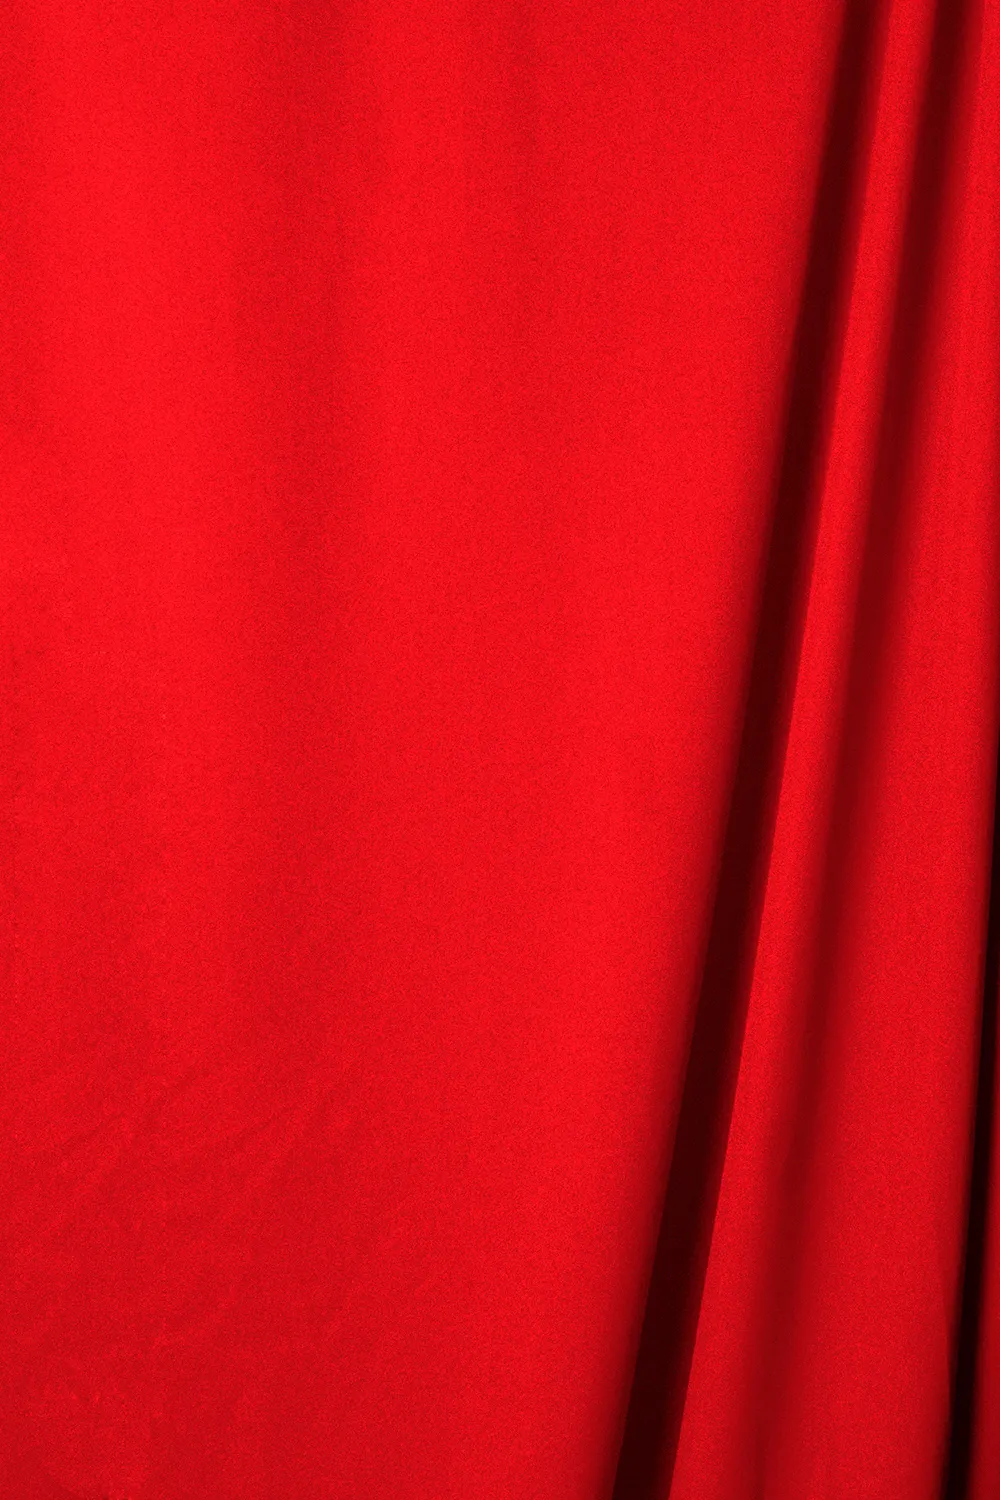 Savage Solid Eco Cardinal Red 1.52m x 2.74m Wrinkle Resistant Polyester Background